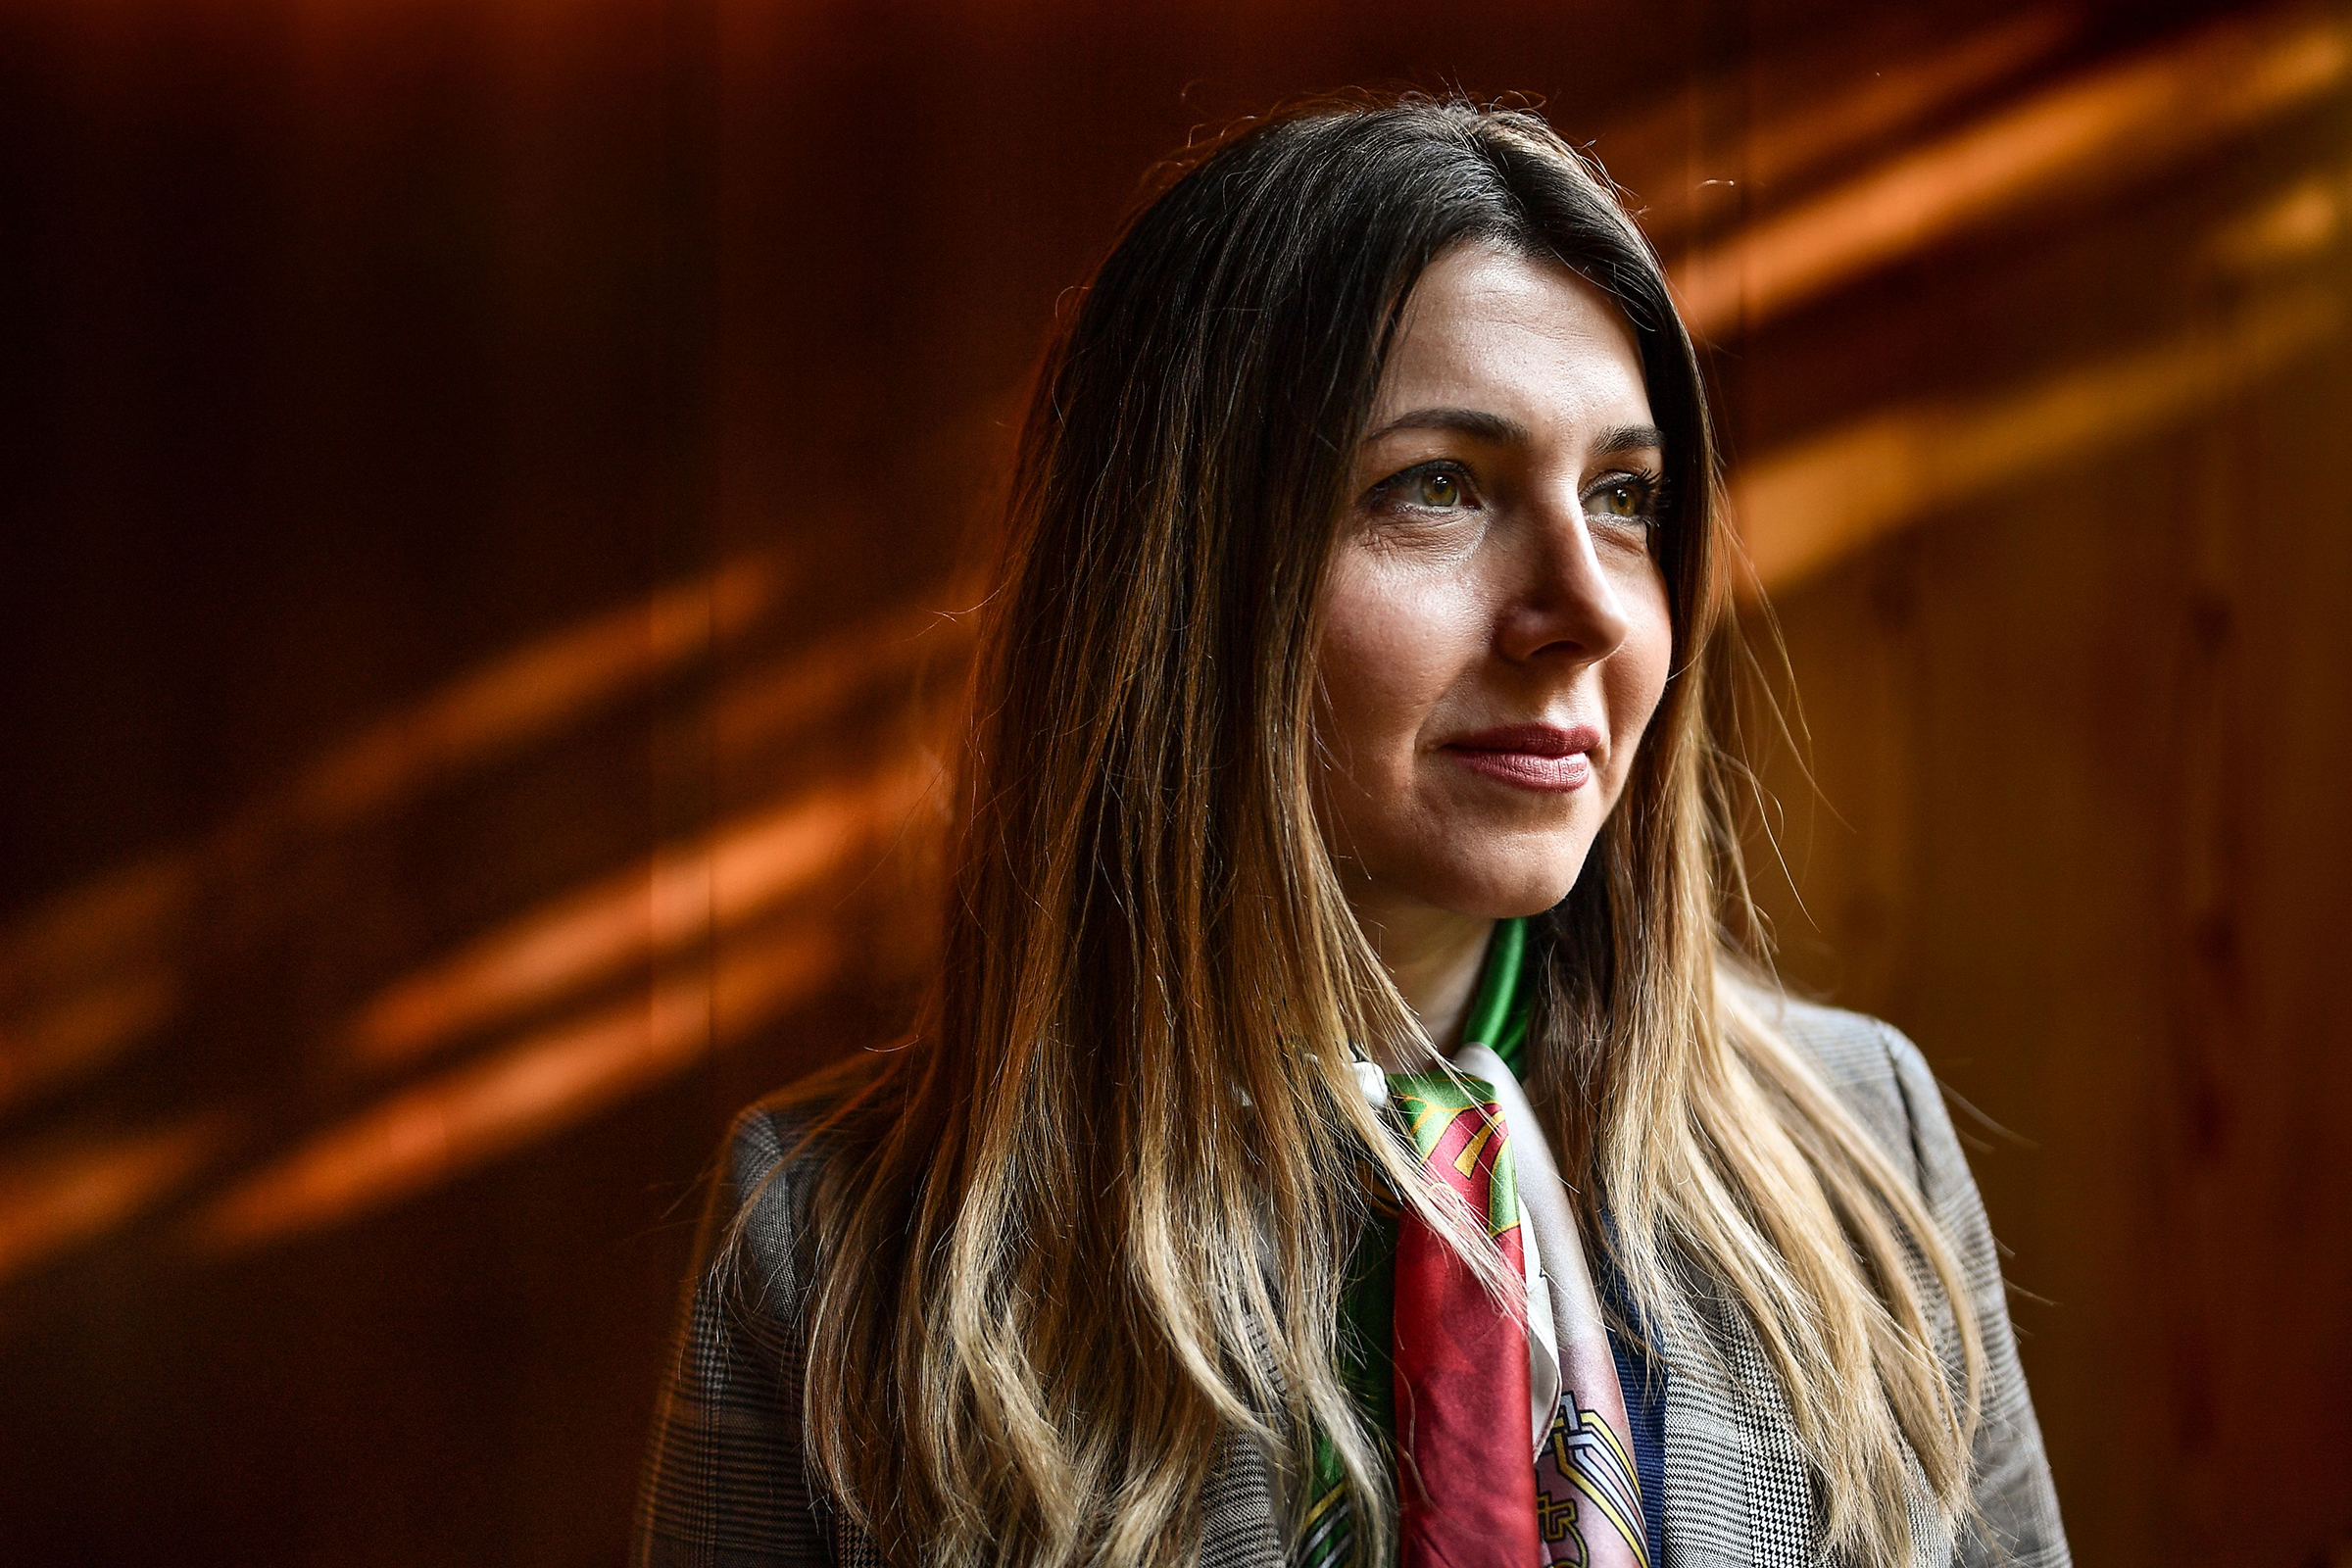 Iranian women's rights activist Shaparak Shajarizadeh on the sidelines of The Geneva Summit for Human Rights and Democracy, in Geneva on Feb. 18, 2020. (Fabrice Coffrini—AFP/Getty Images)